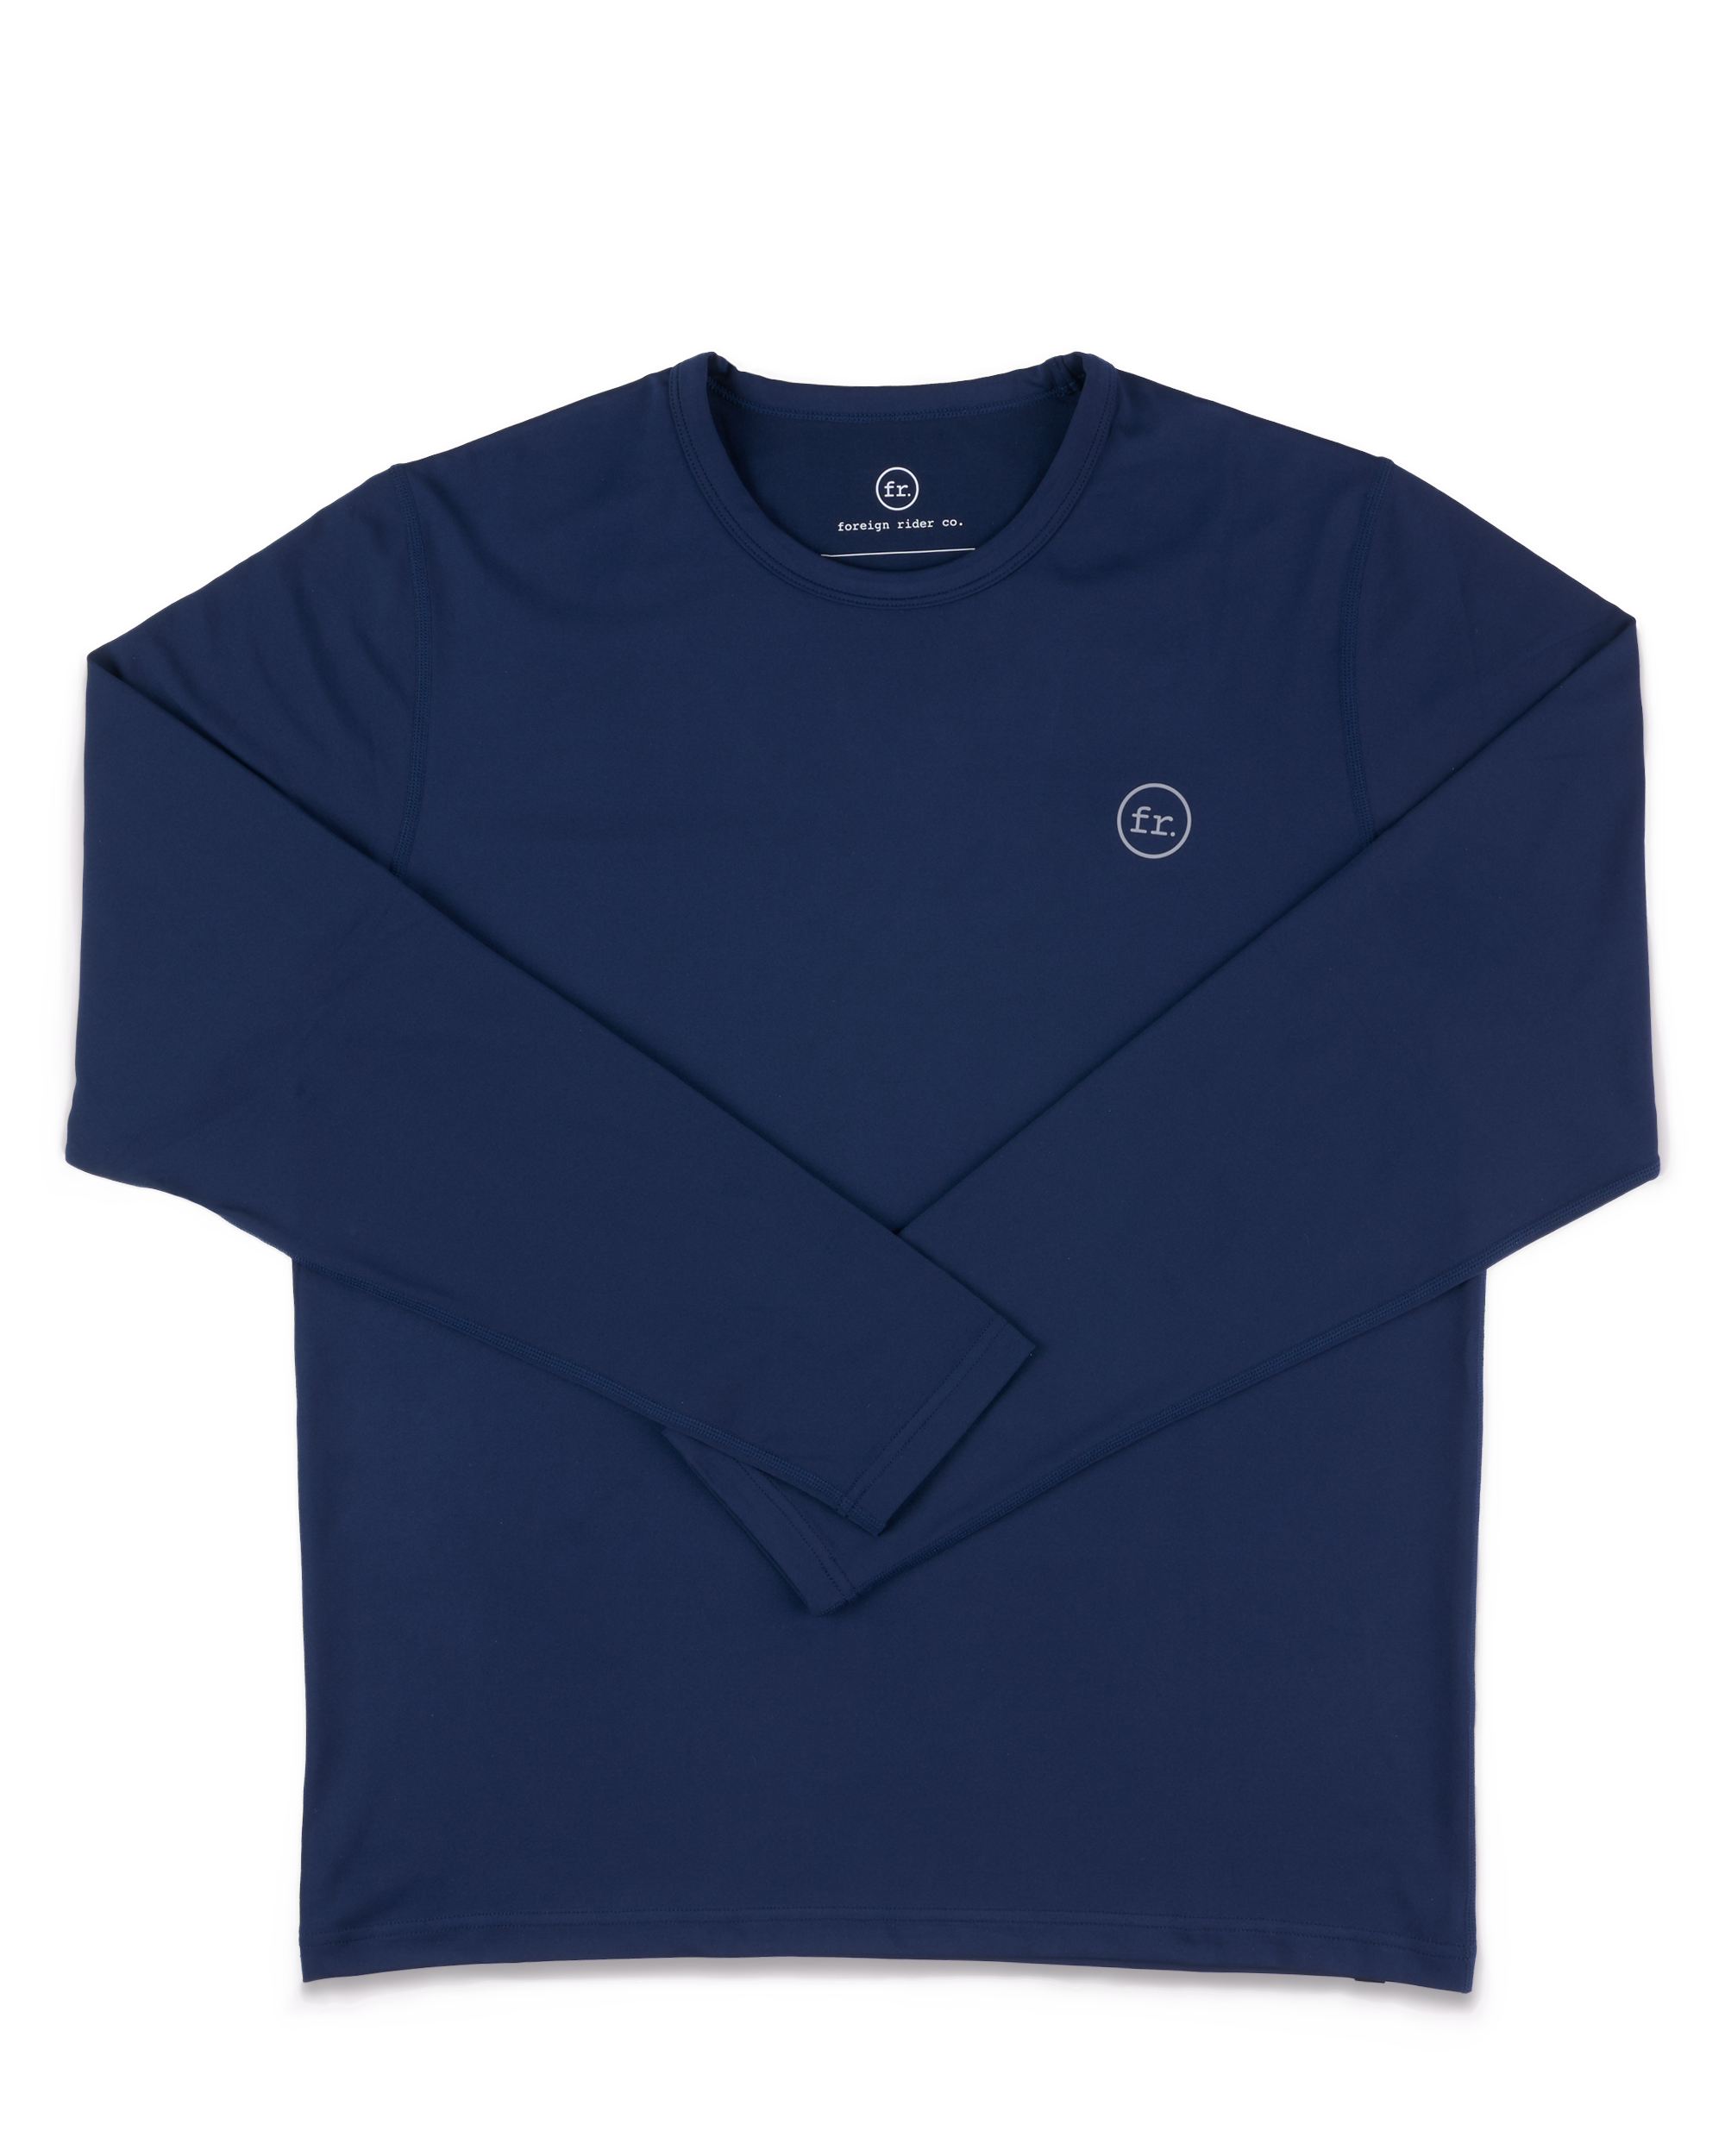 FR. Performance LS T-Shirt Navy - Foreign Rider Co.